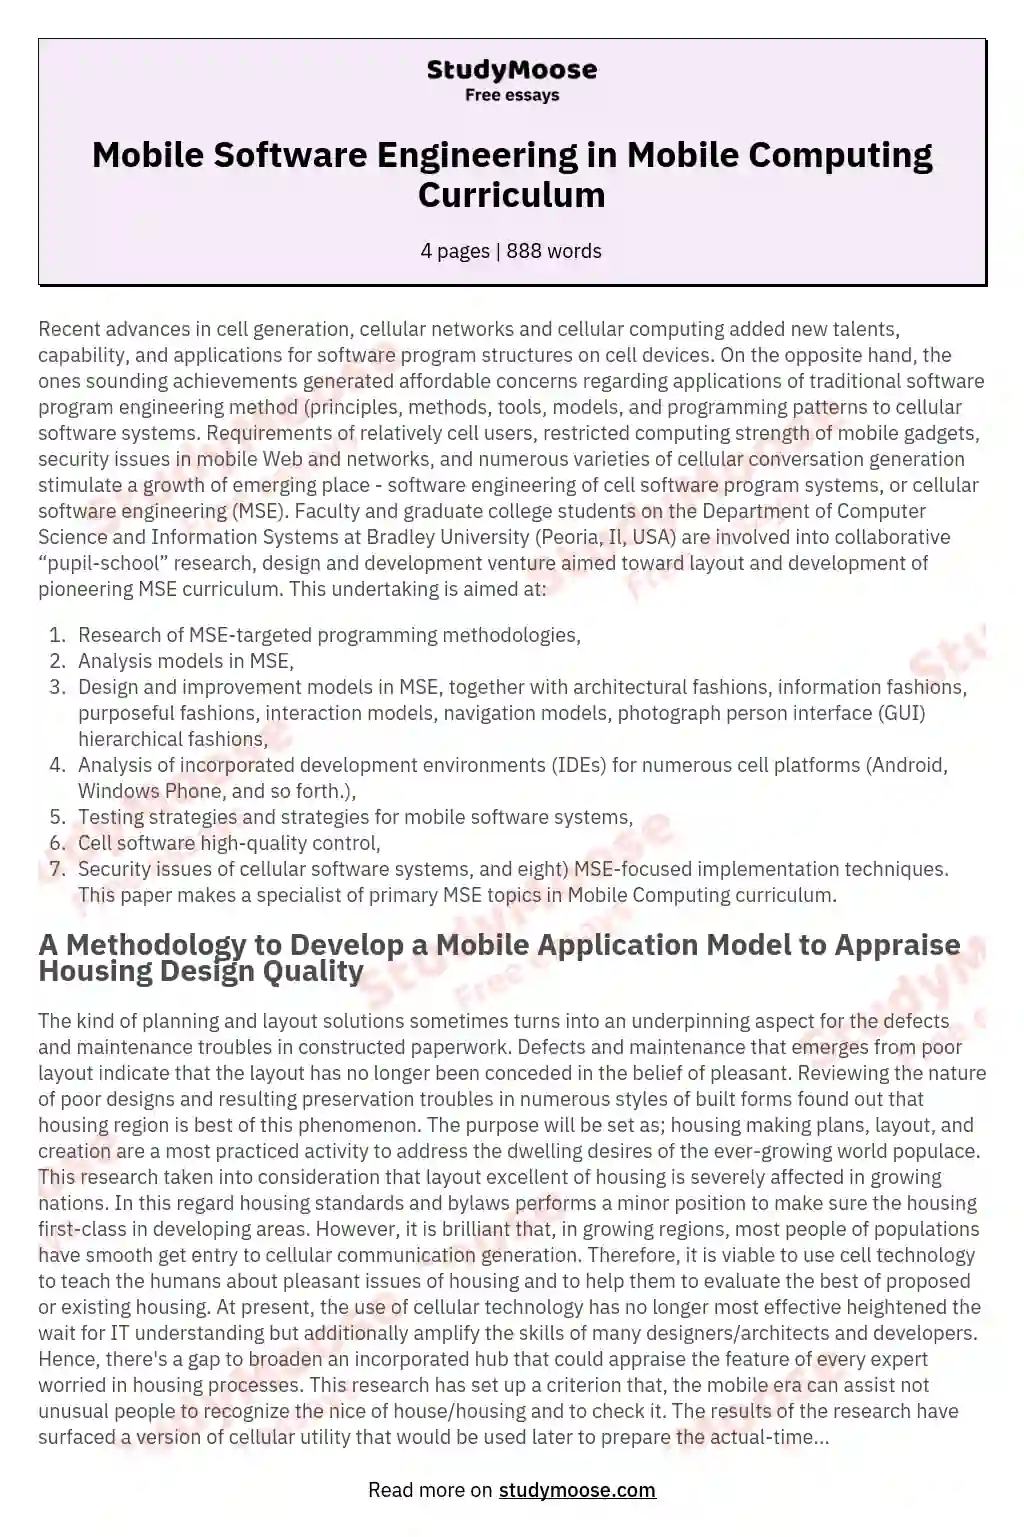 Mobile Software Engineering in Mobile Computing Curriculum